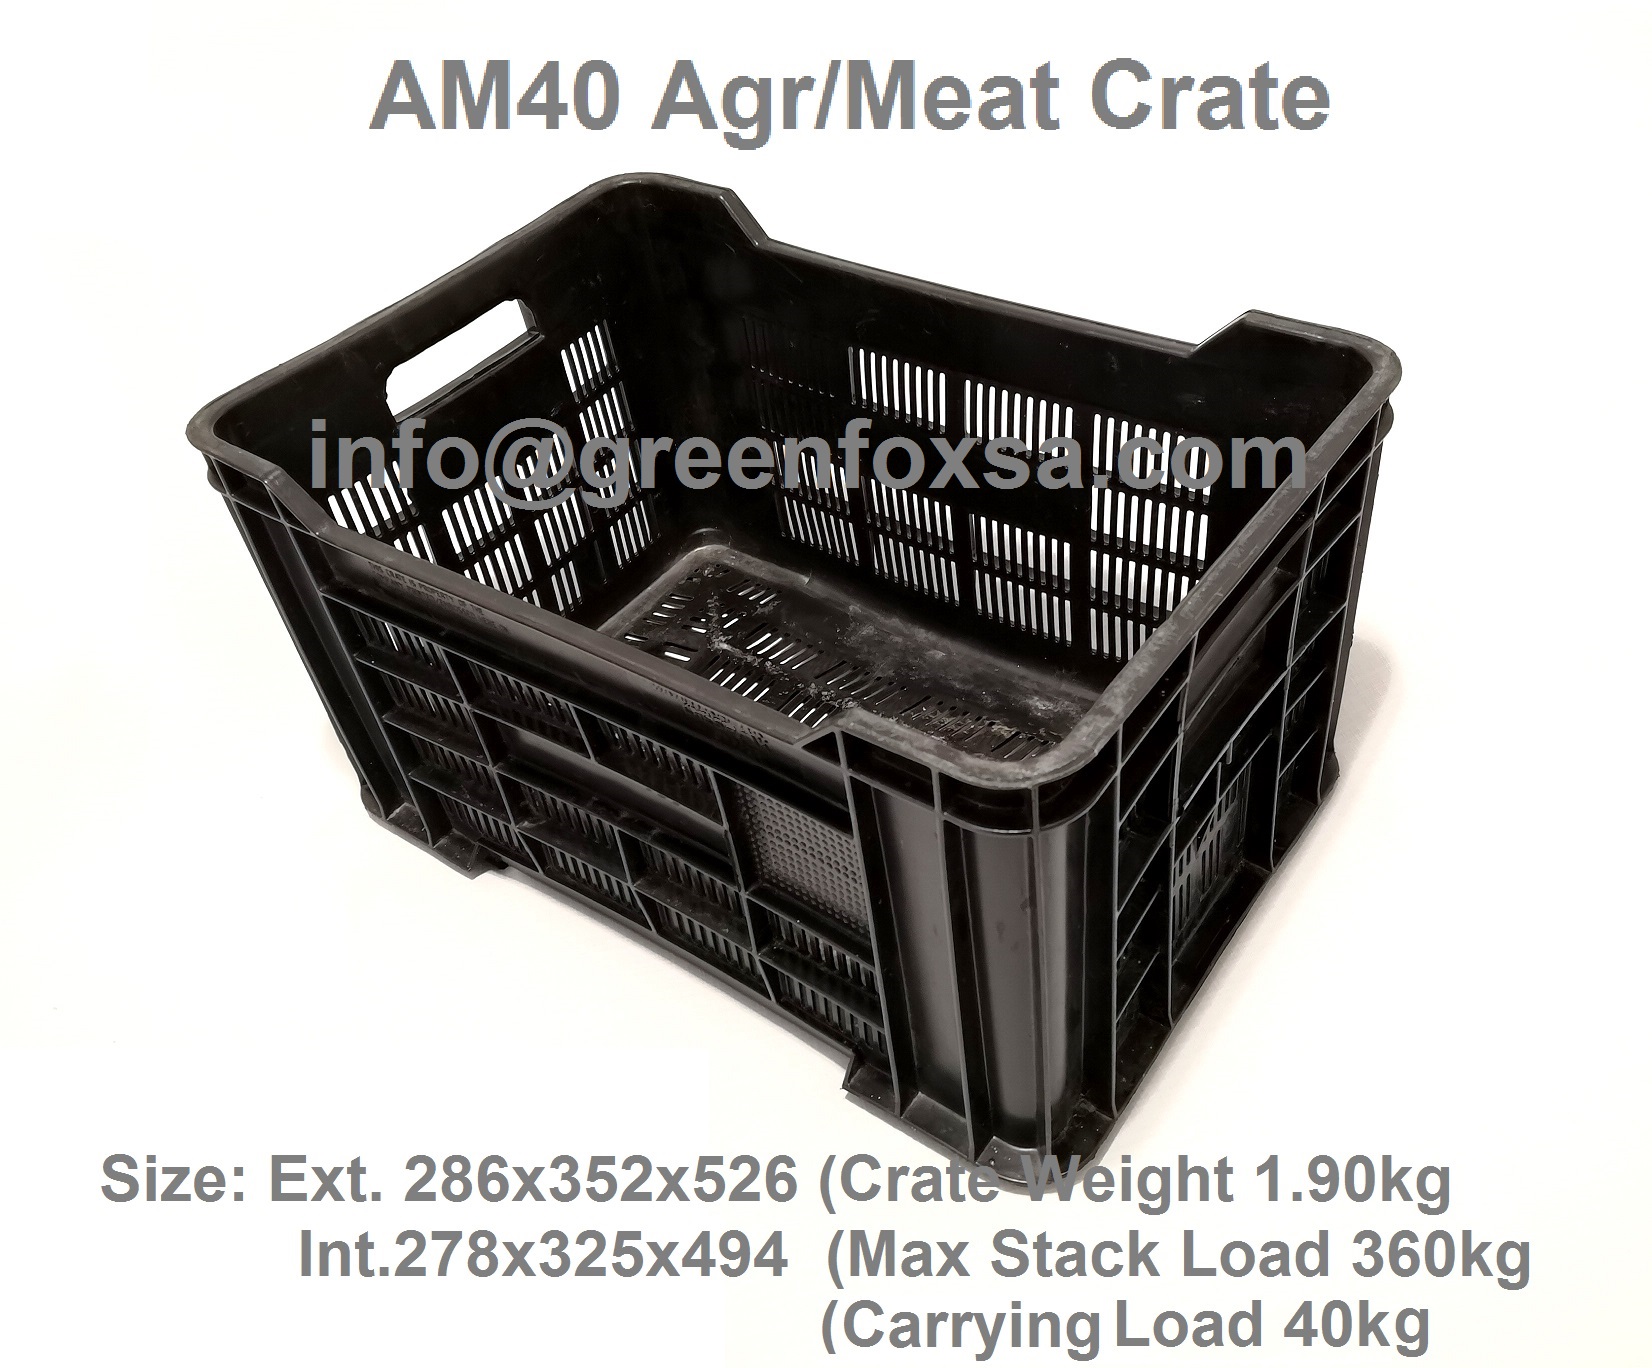 plastic-agricultural-meat-crates-black-recycle